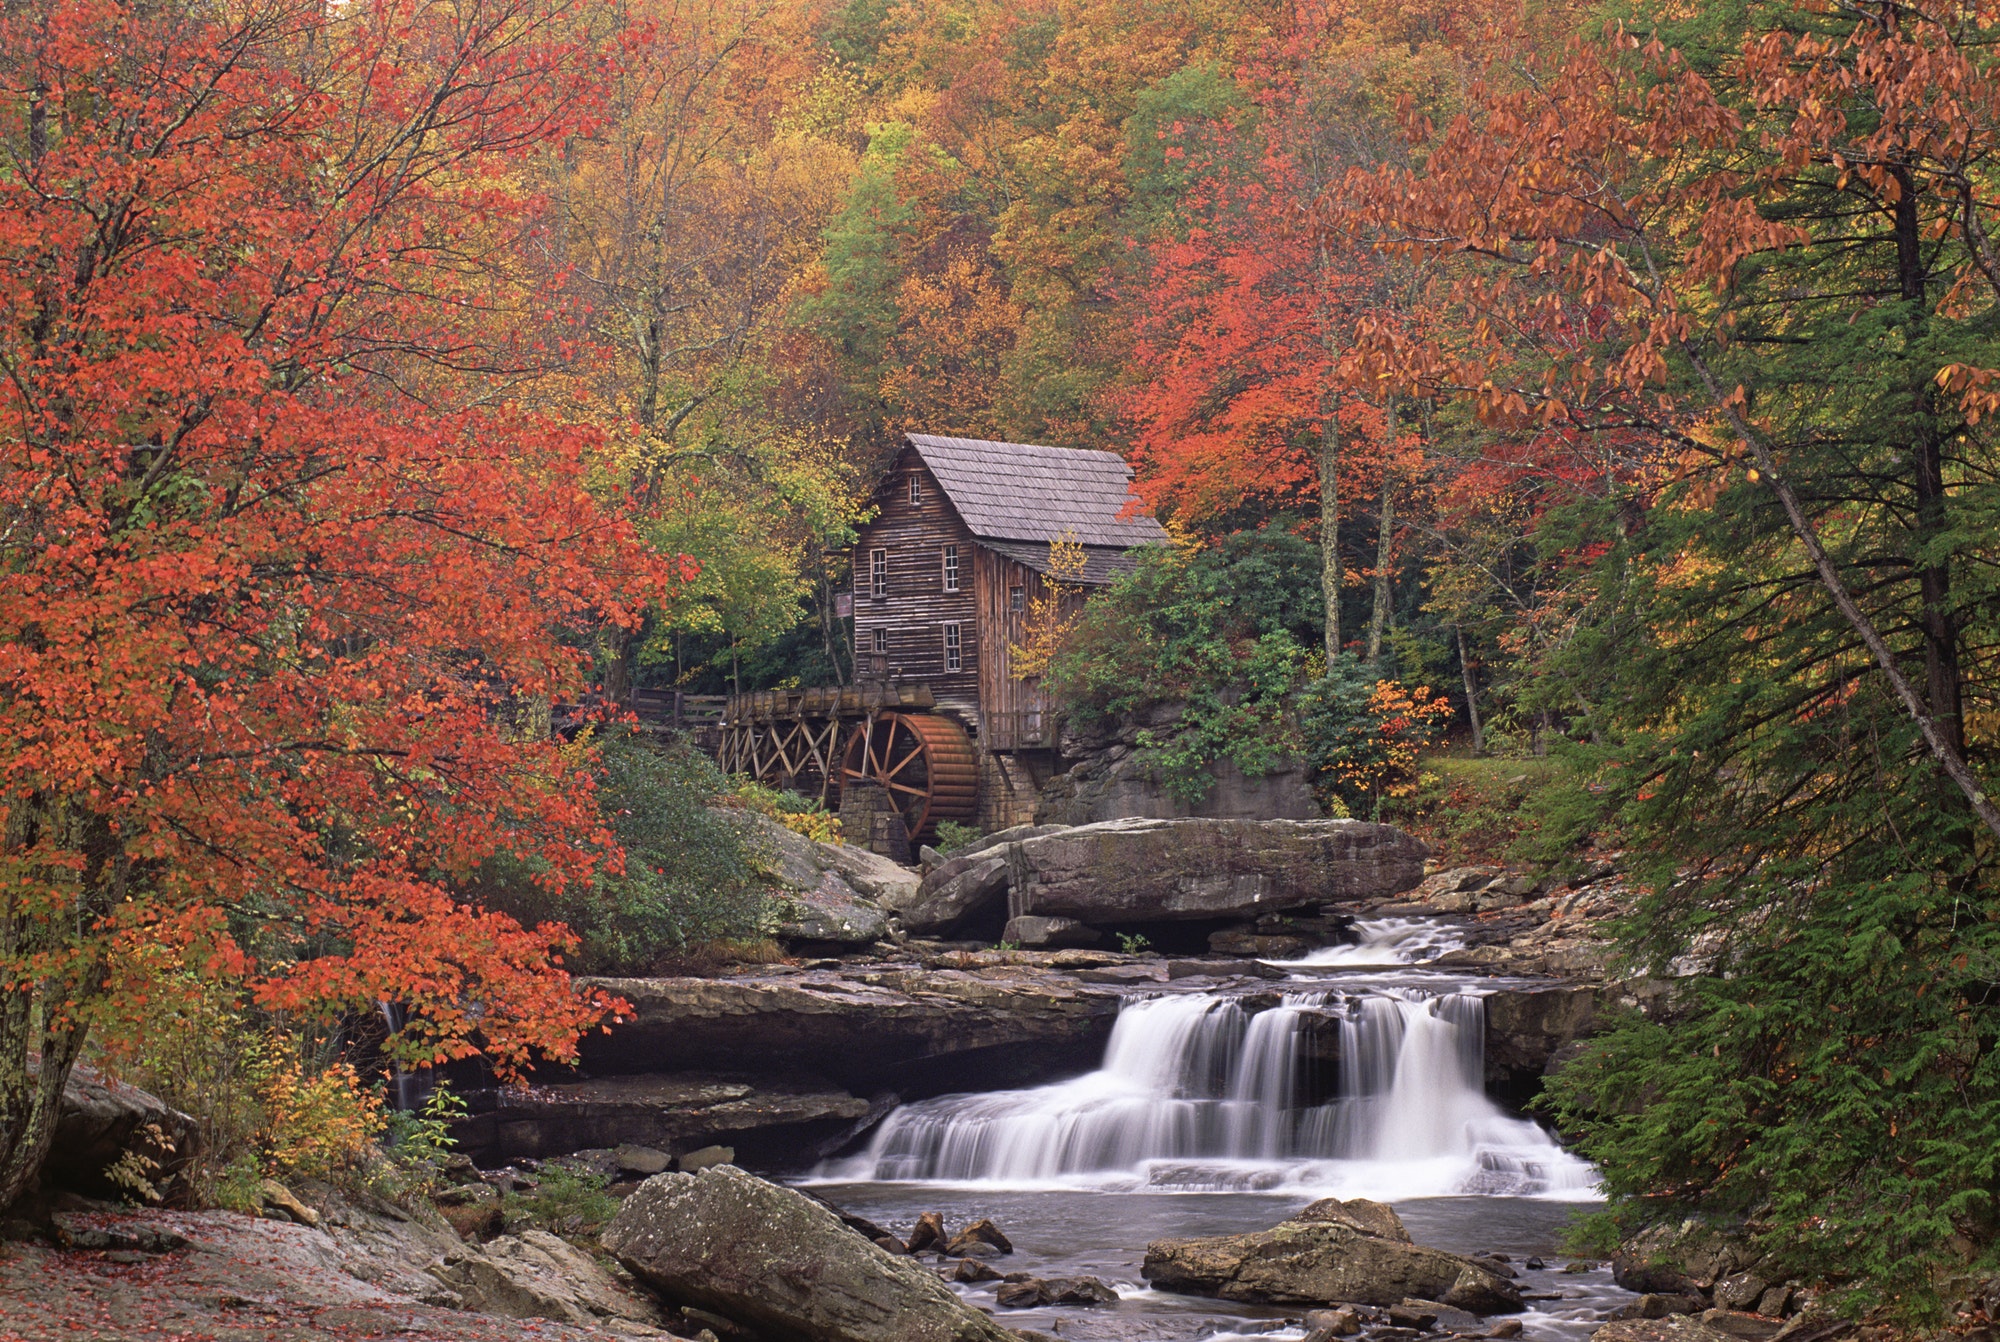 A historic grist mill building on the banks of Glade Creek in West Virginia.